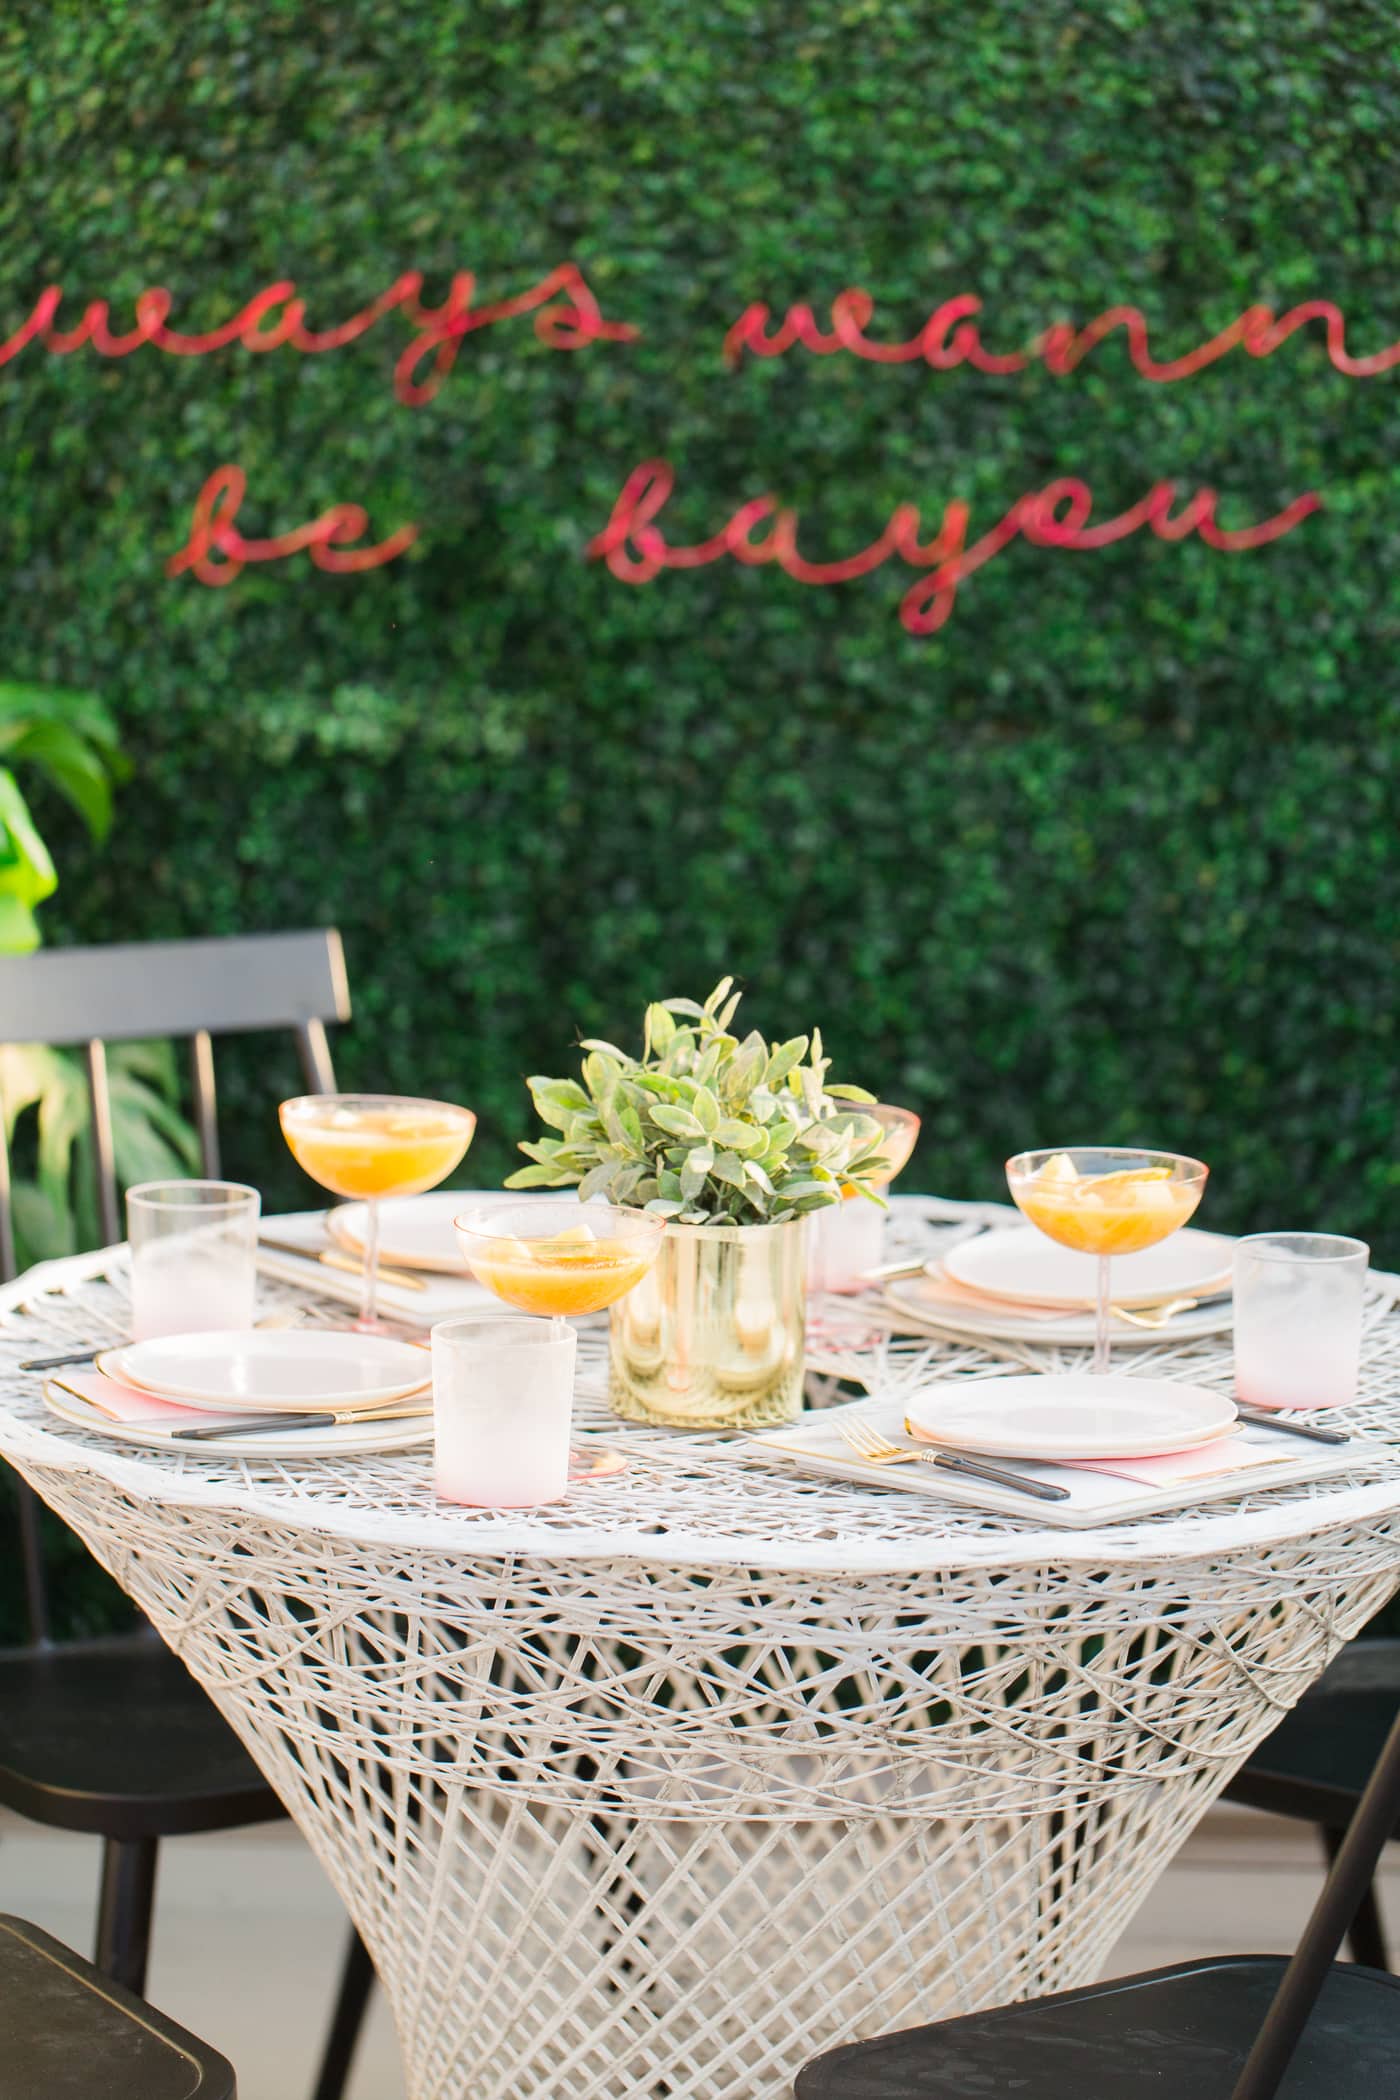 Our Downtown Rooftop Patio Makeover Reveal by top Houston lifestyle blogger Ashley Rose of Sugar & Cloth #makeover #beforeandafter #design #homedecor